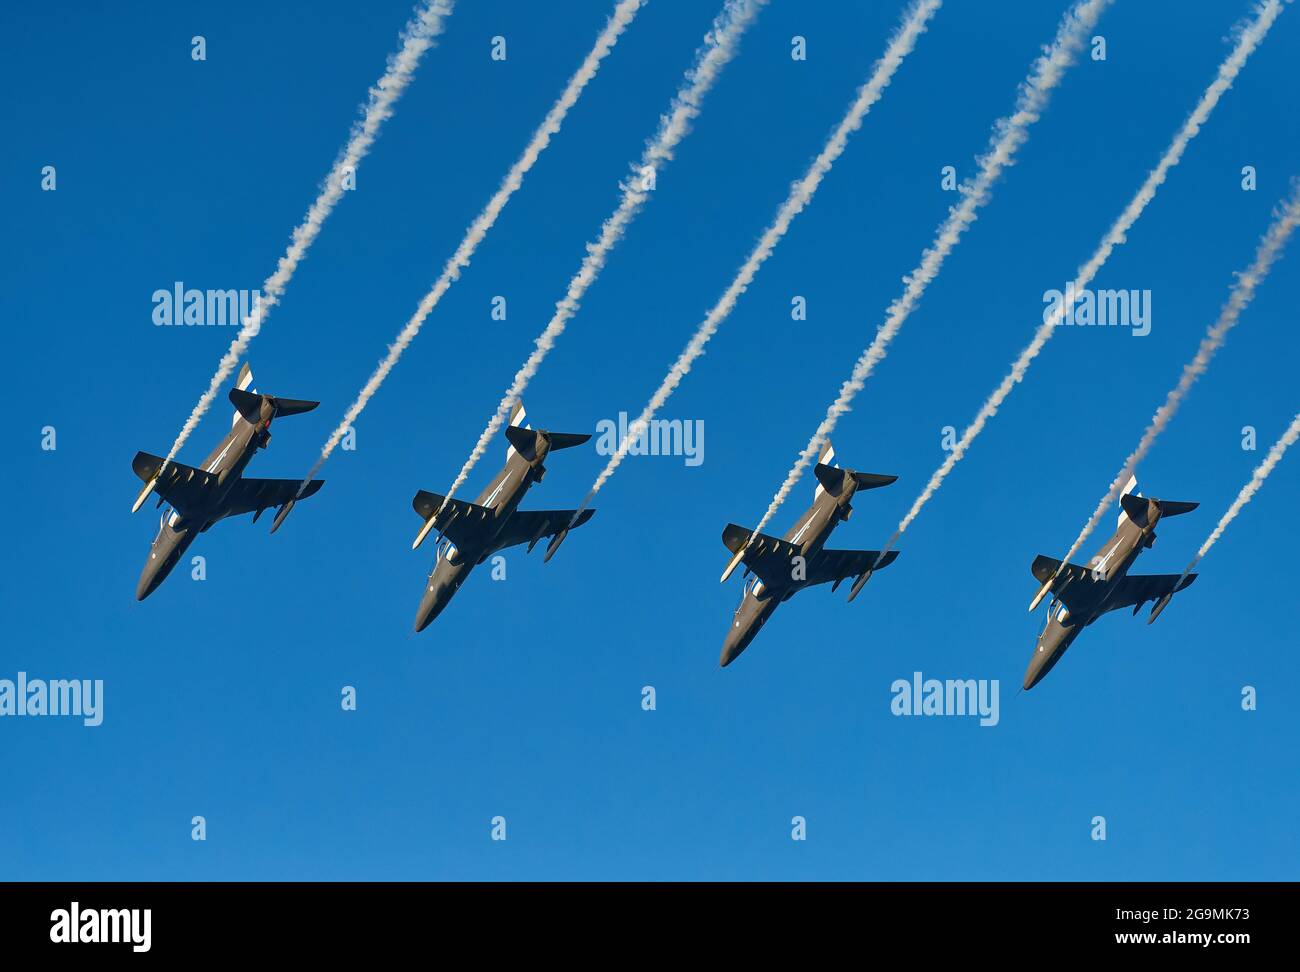 Helsinki, Finland - 9 June 2017: The Finnish Air Force Display Team Midnight Hawks celebrating 20th anniversary of the team and 100 years centenary of Stock Photo